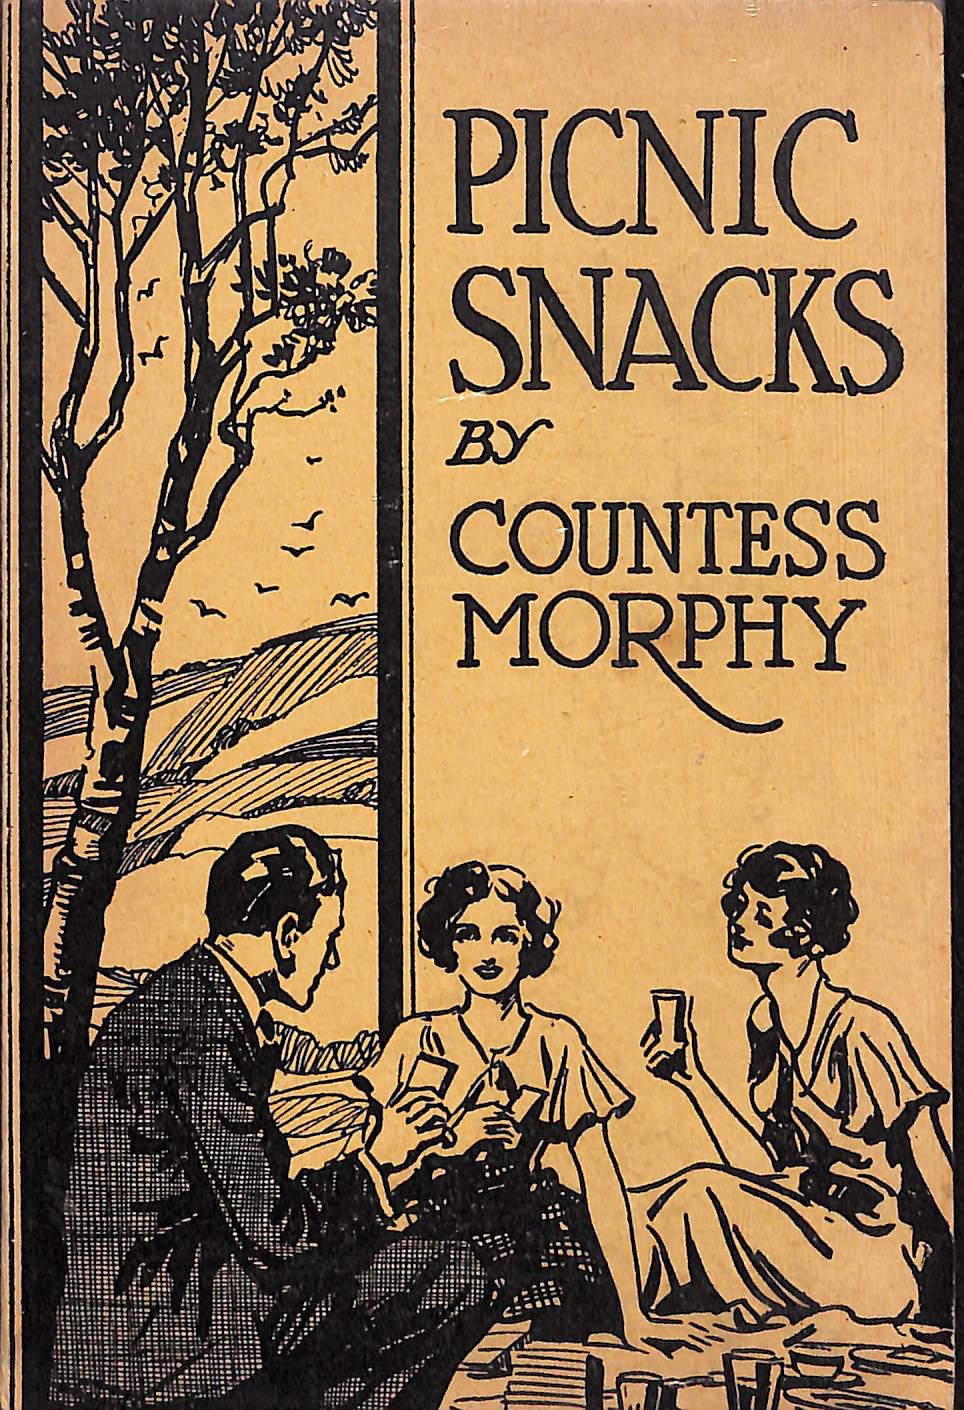 "Picnic Snacks" by Countess Morphy